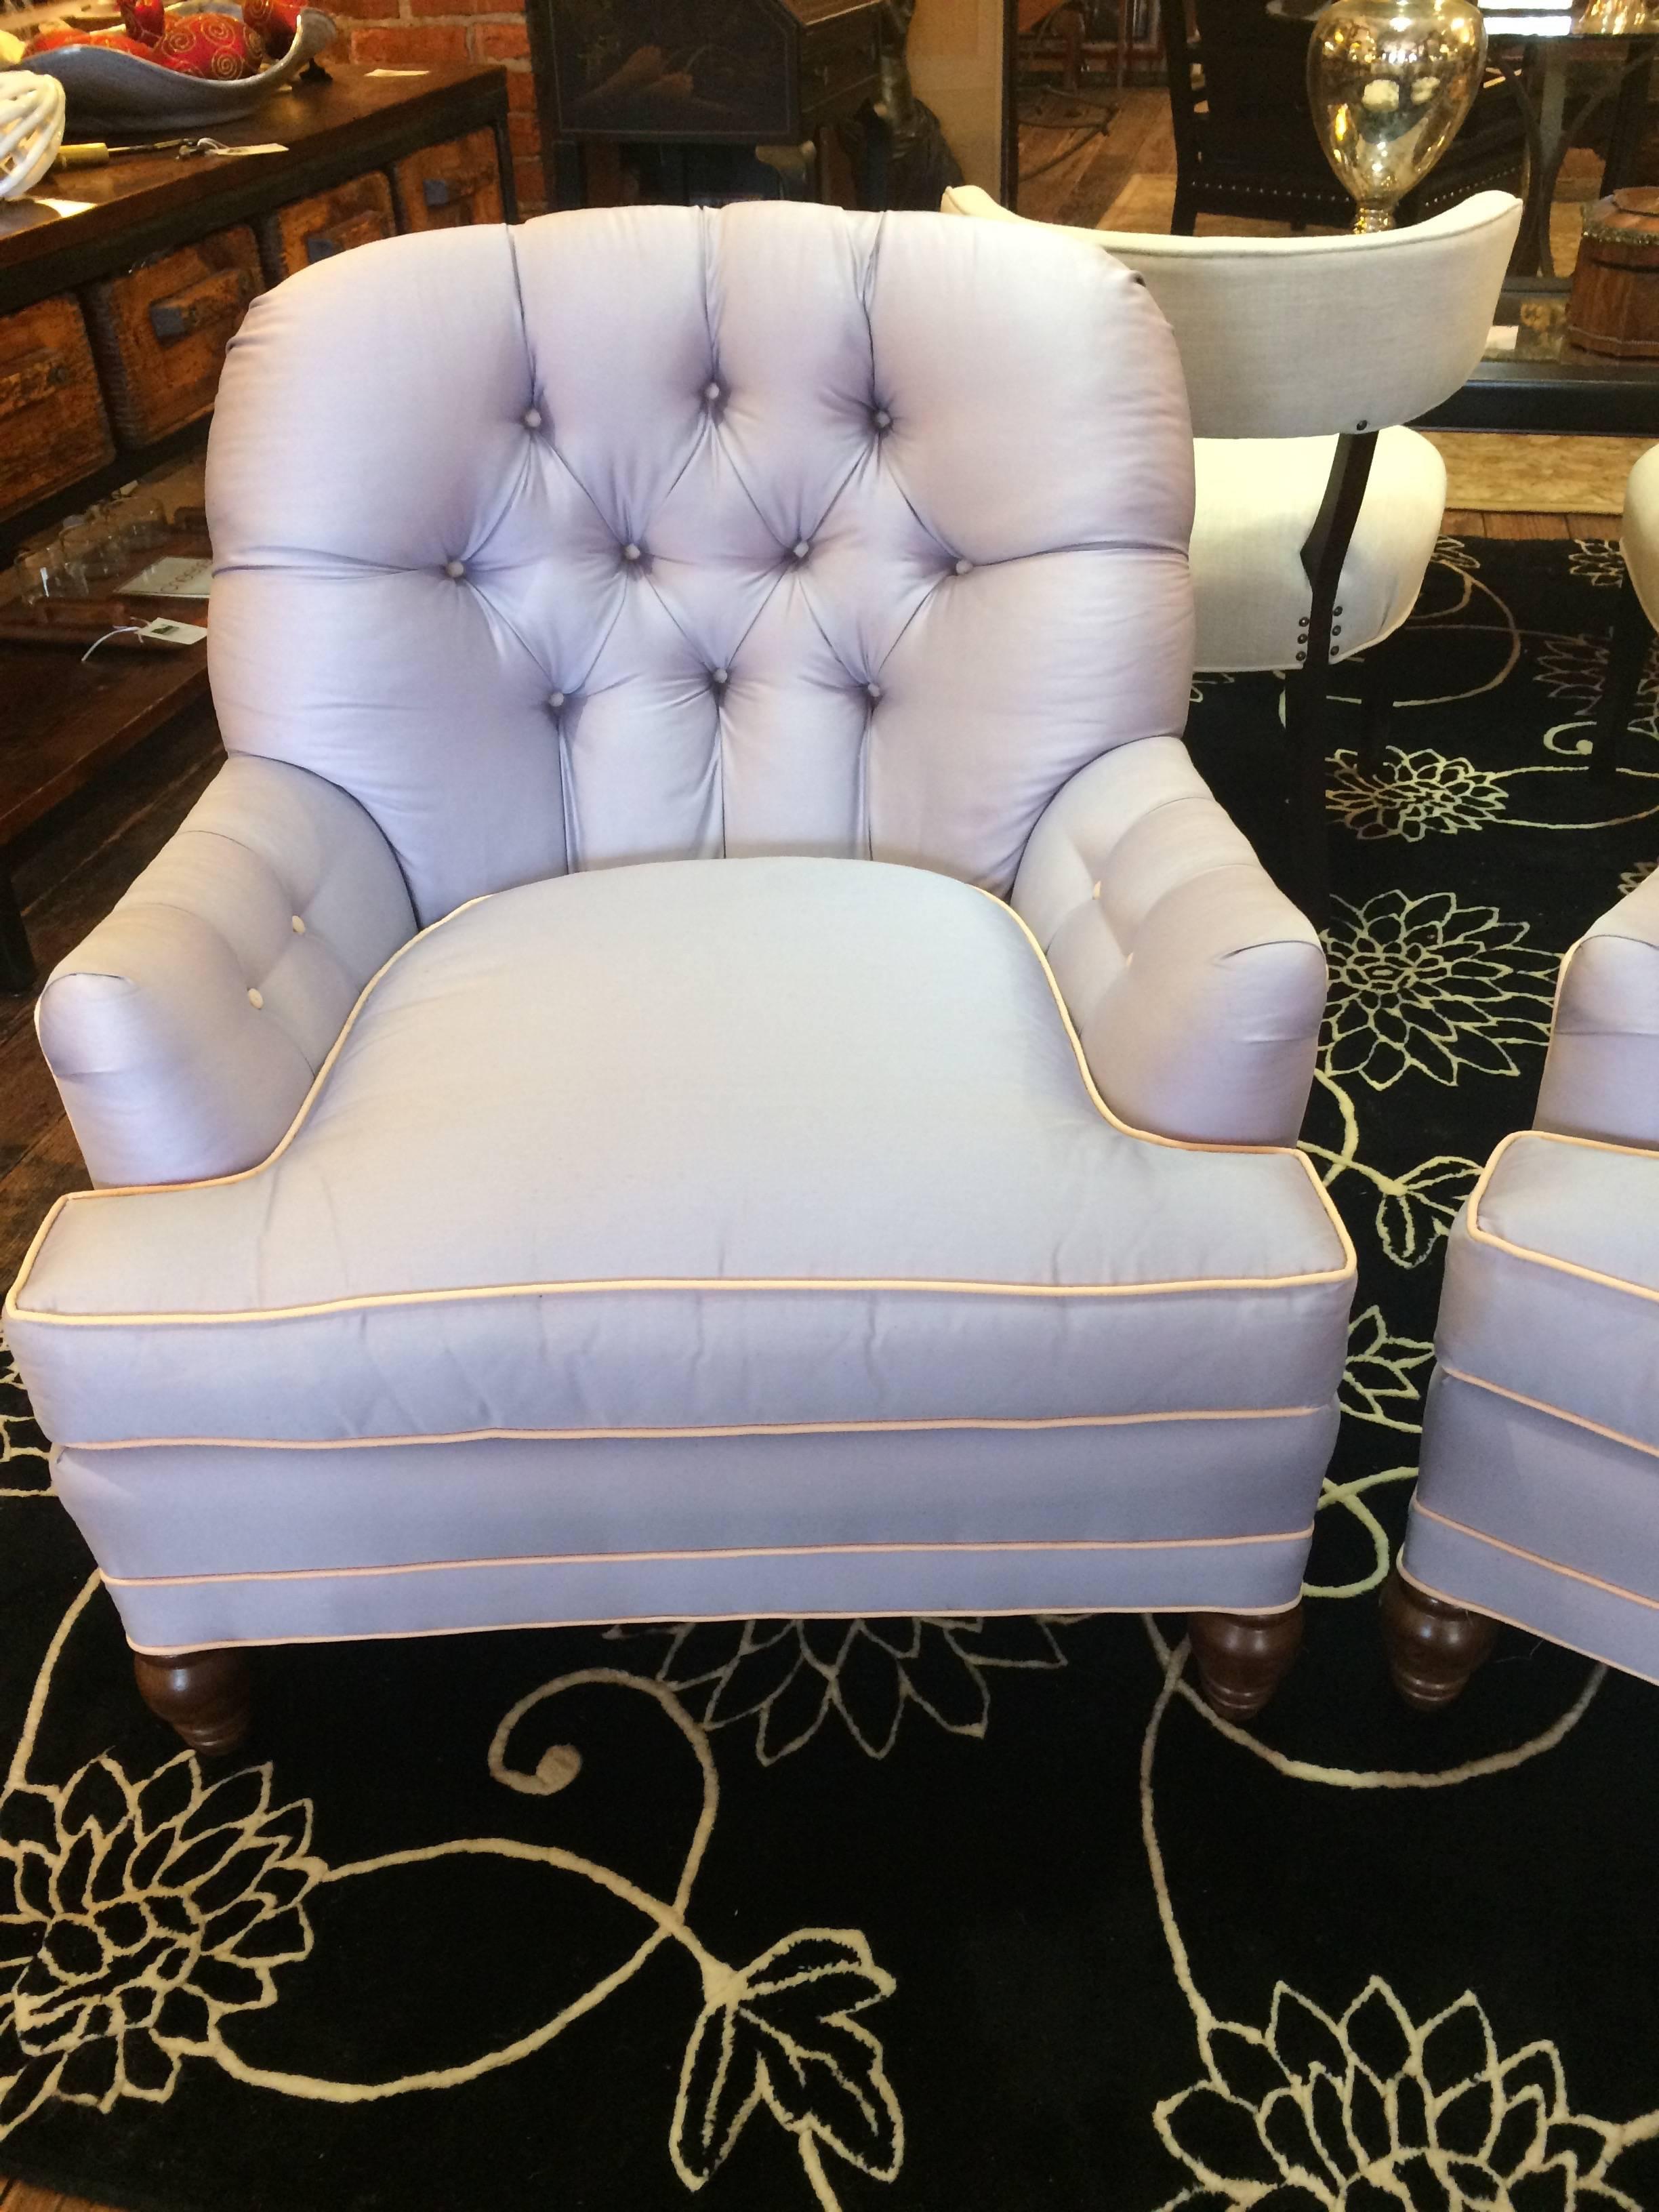 A chic pair of club chairs in a heavenly shade of light blue lavender having tufted backs and arms and cool white piping.